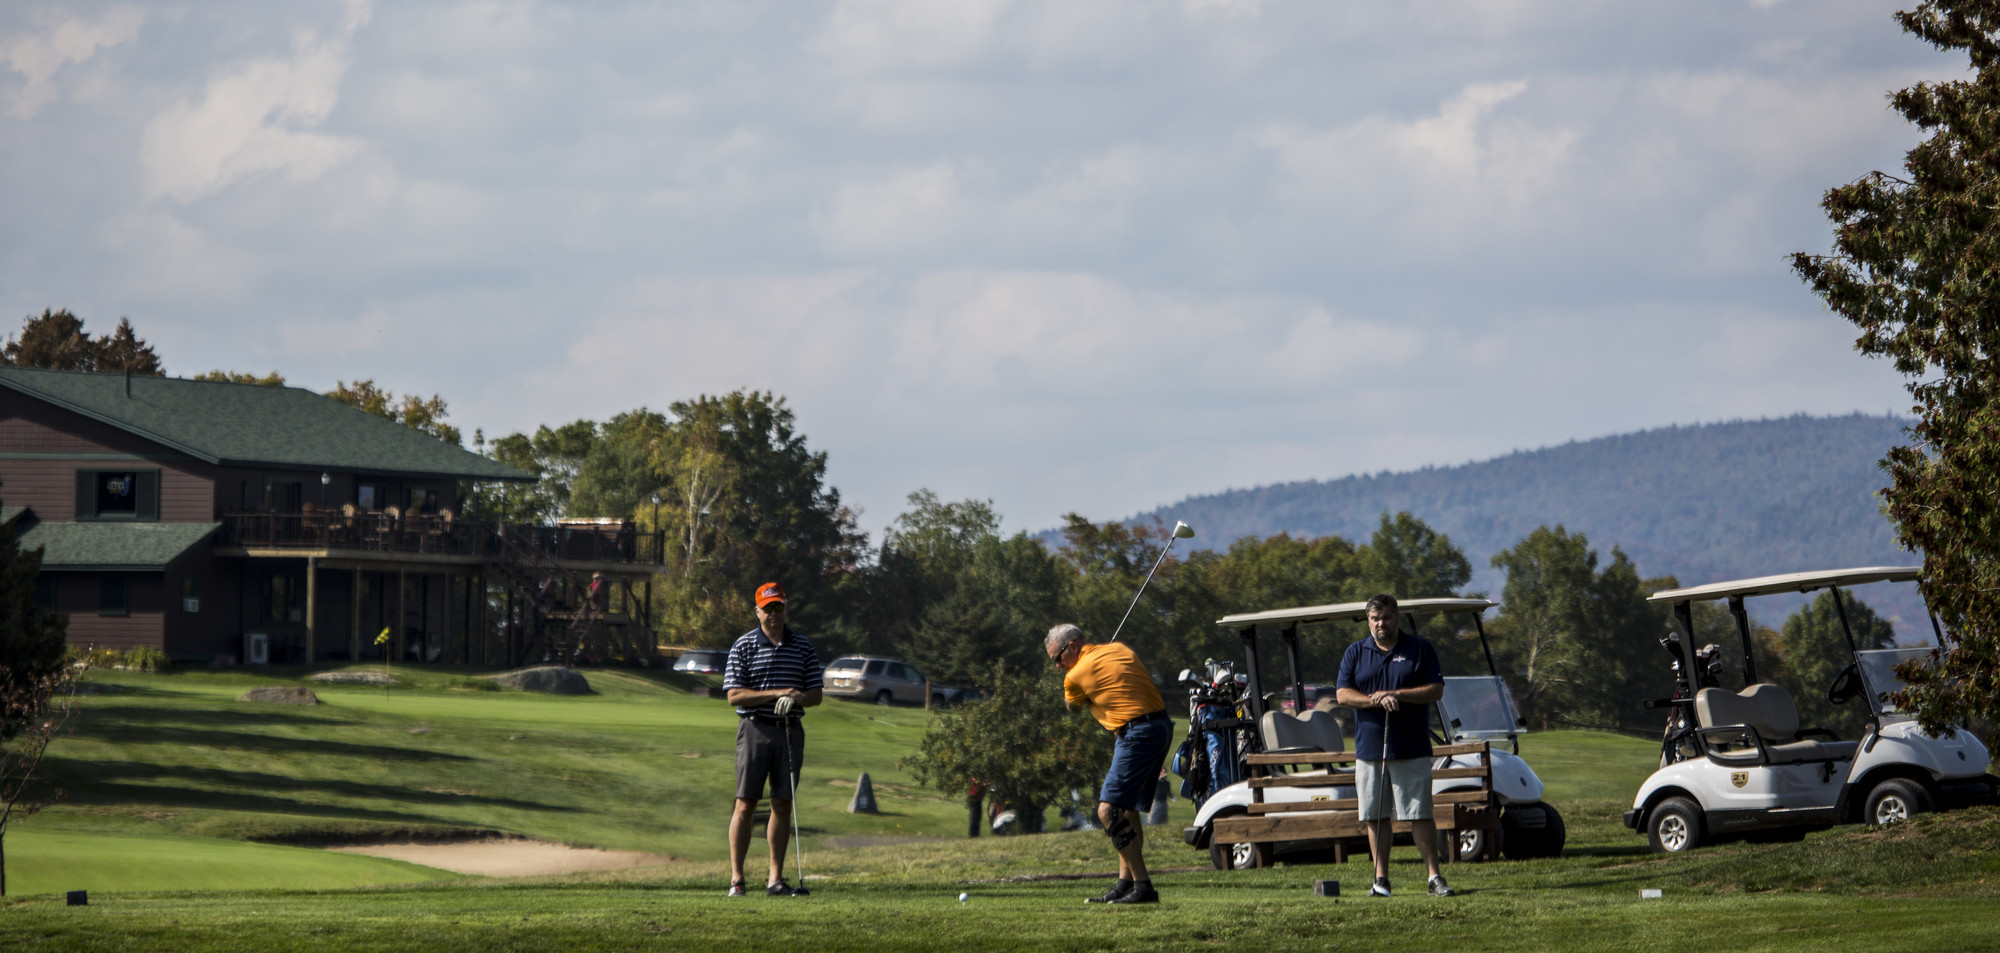 Three men golf with golf carts and clubhouse in the background.